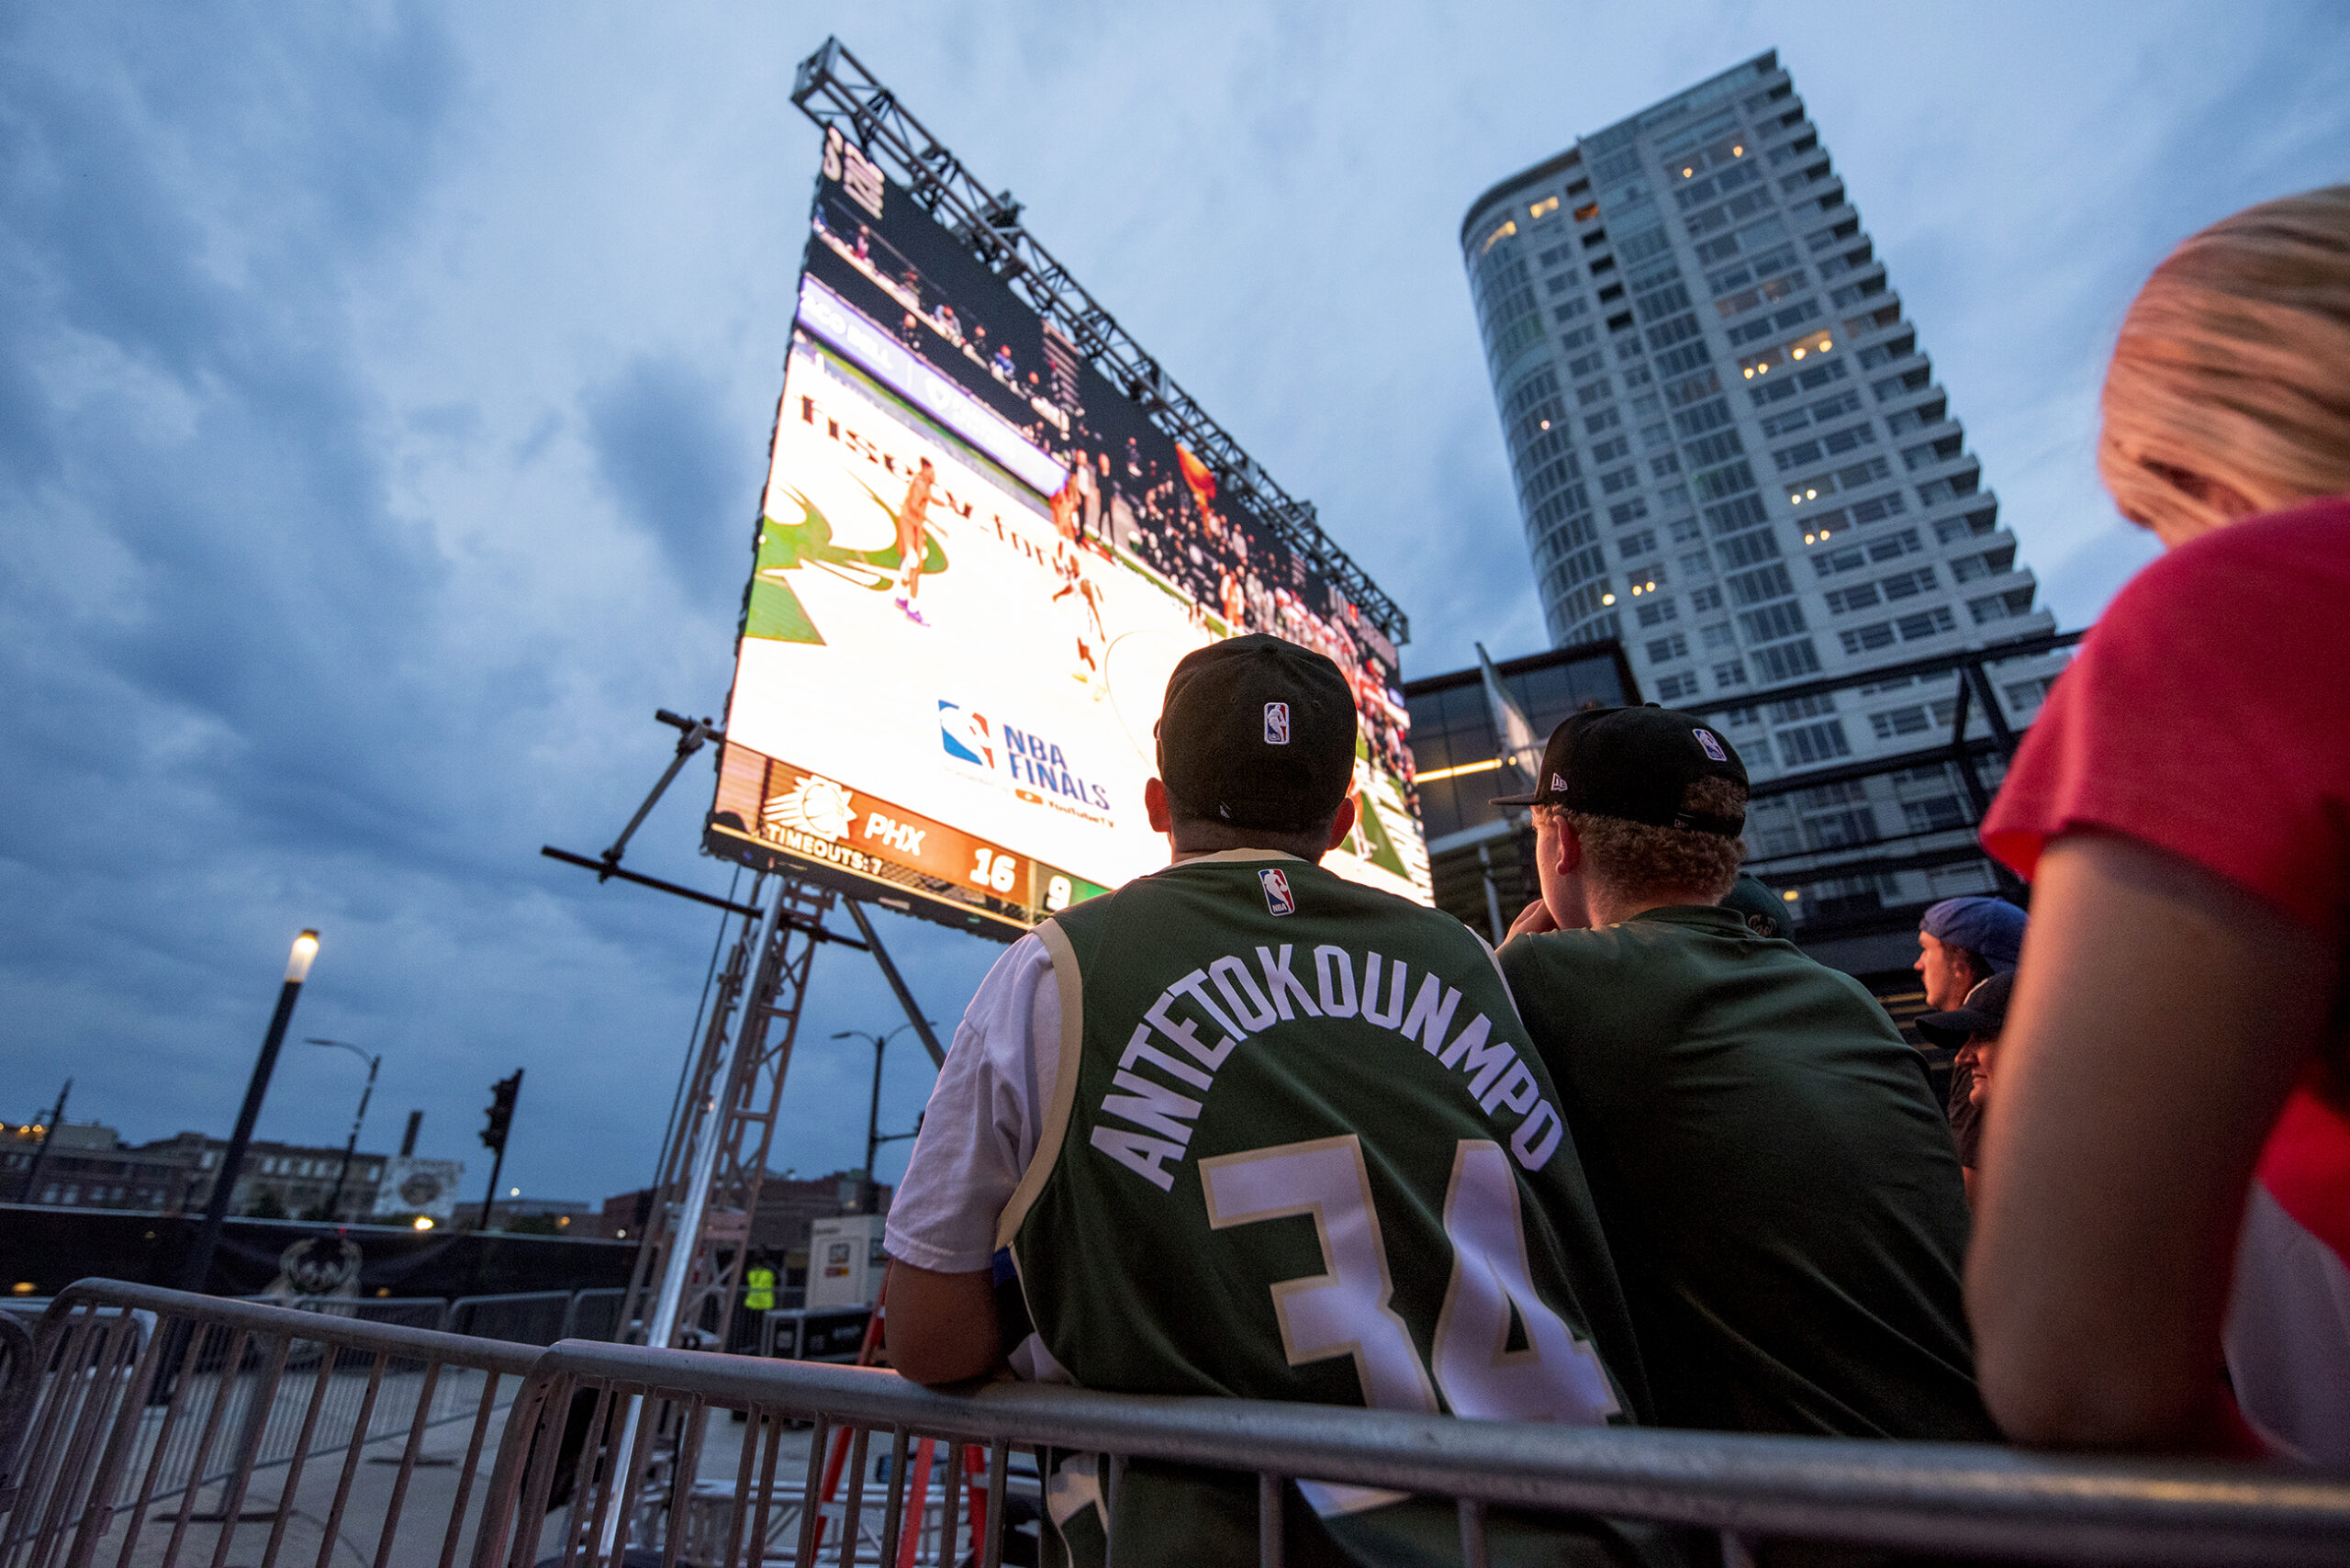 A dark cloudy sky can be seen behind a screen showing the Bucks vs. Suns game.